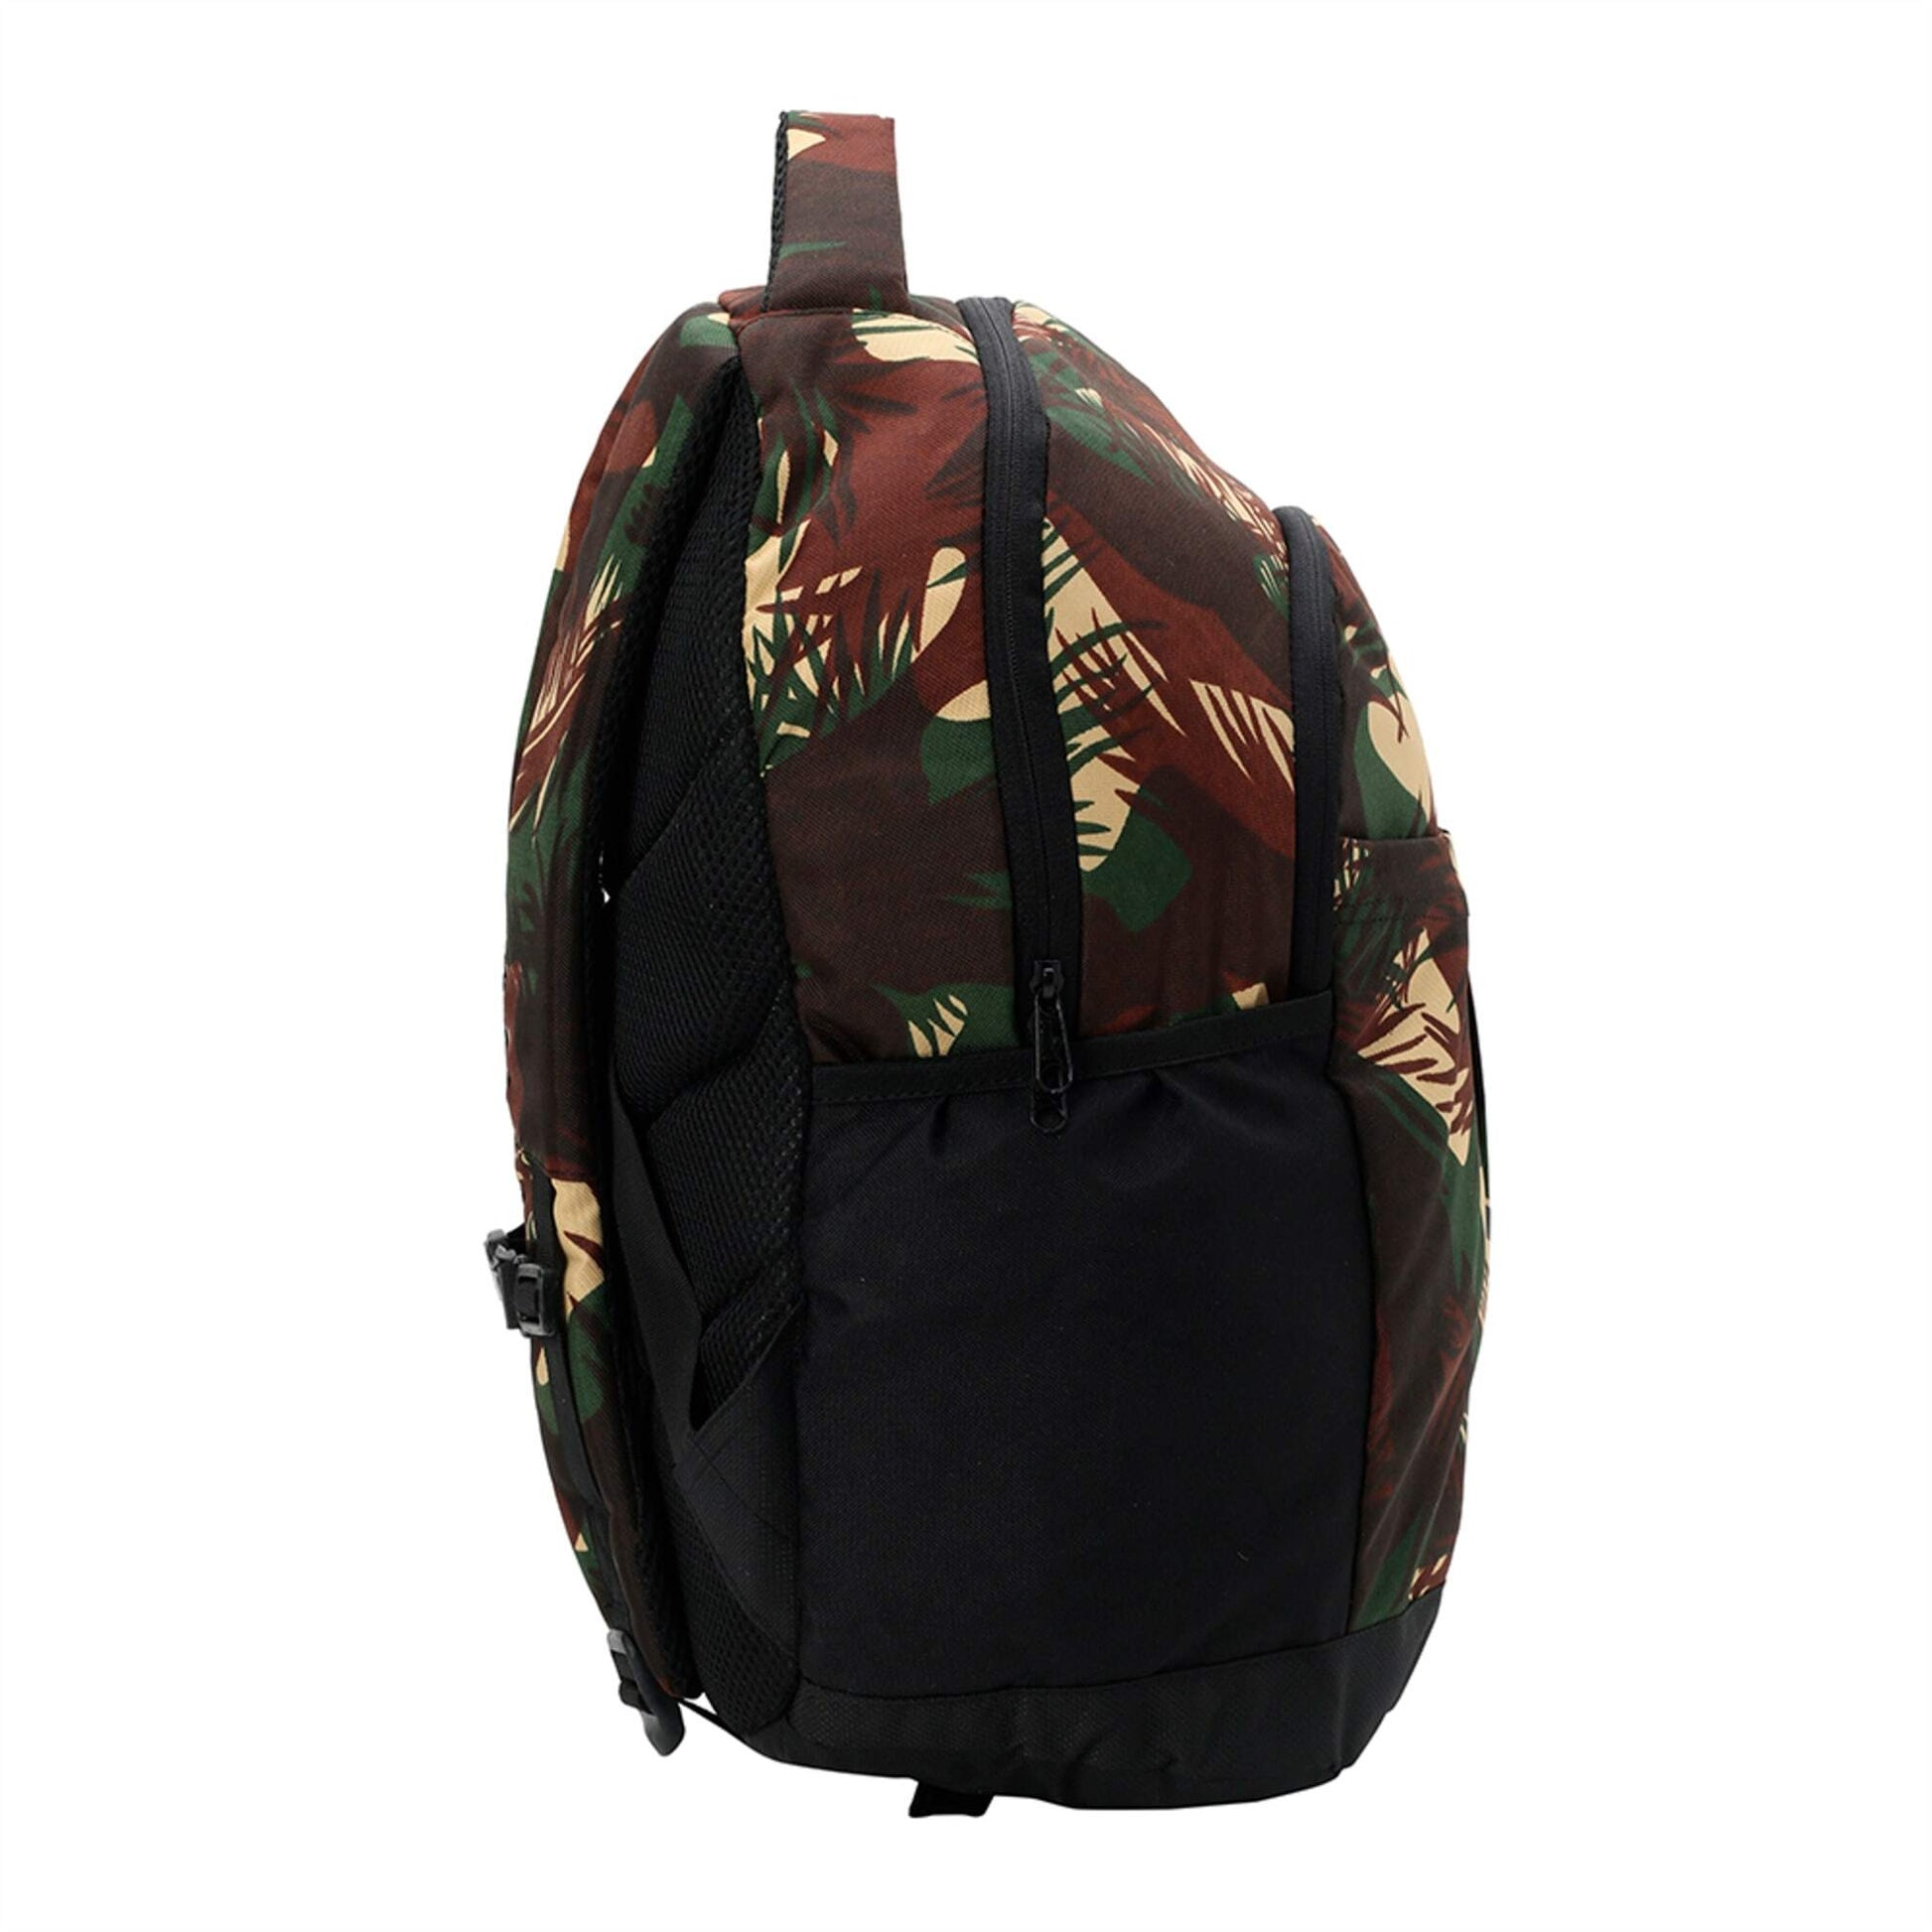 Elevated School Backpack-076081011 - Discount Store